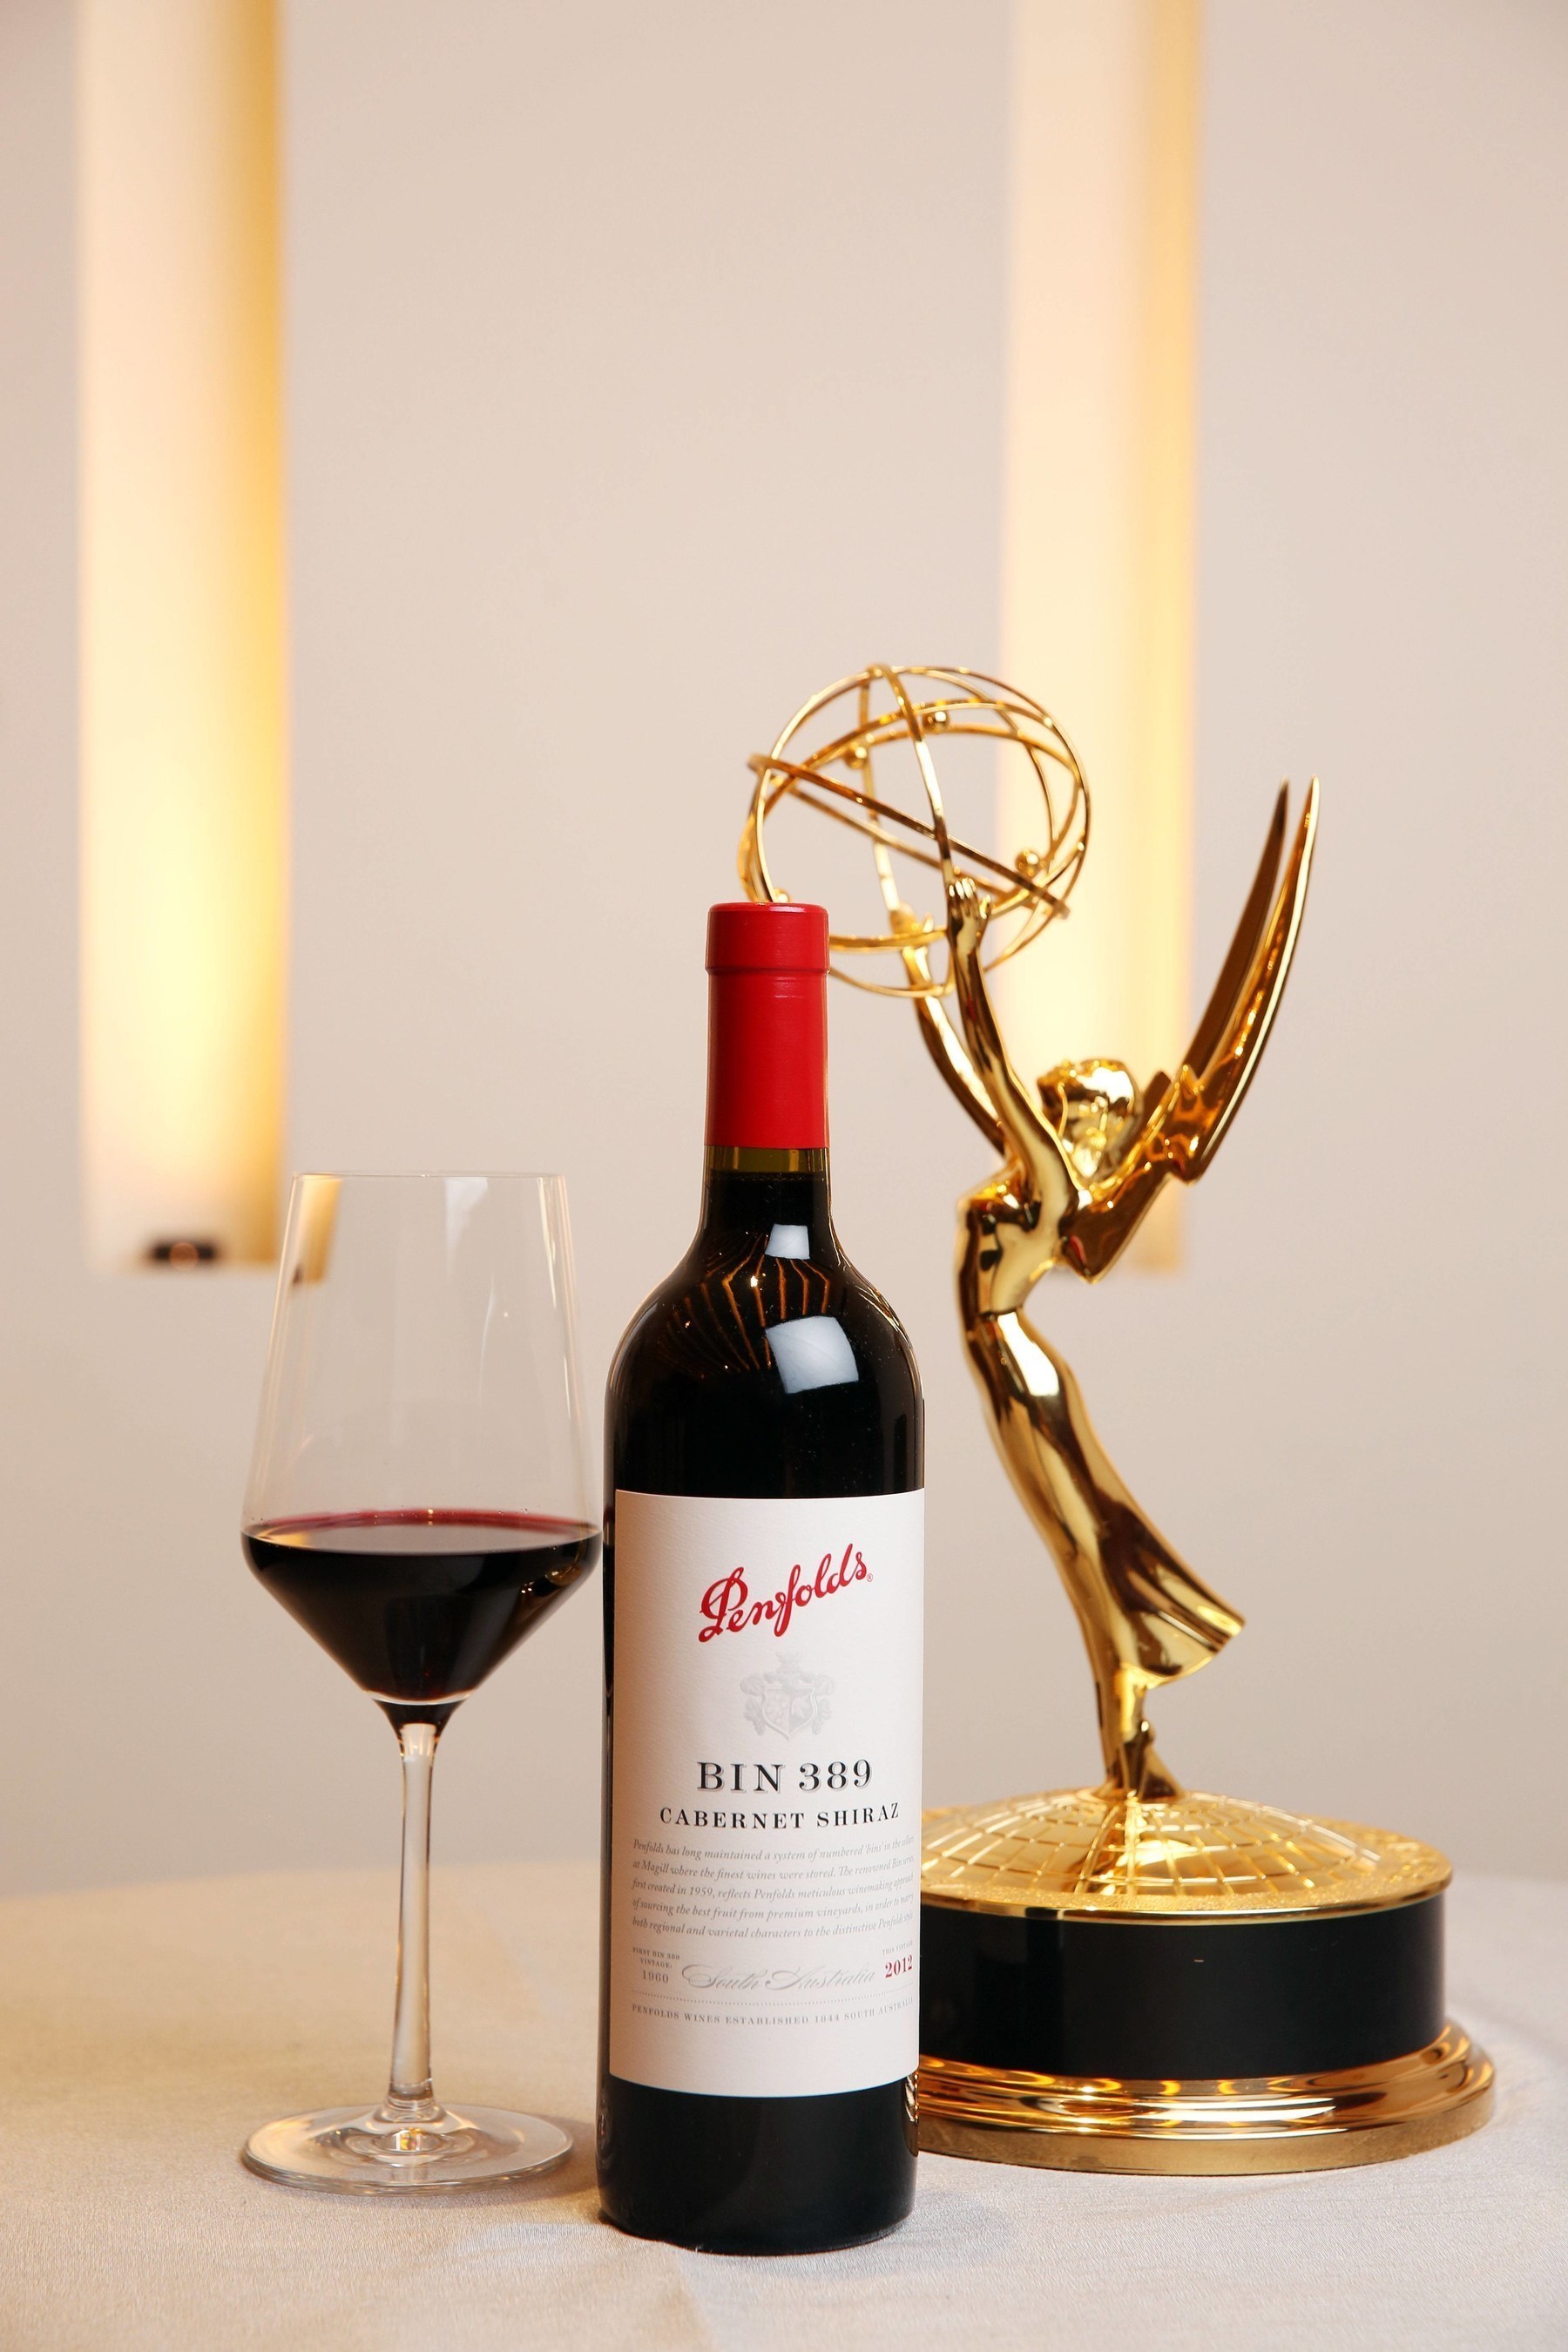 Penfolds launches Bin 389 travel retail gift pack